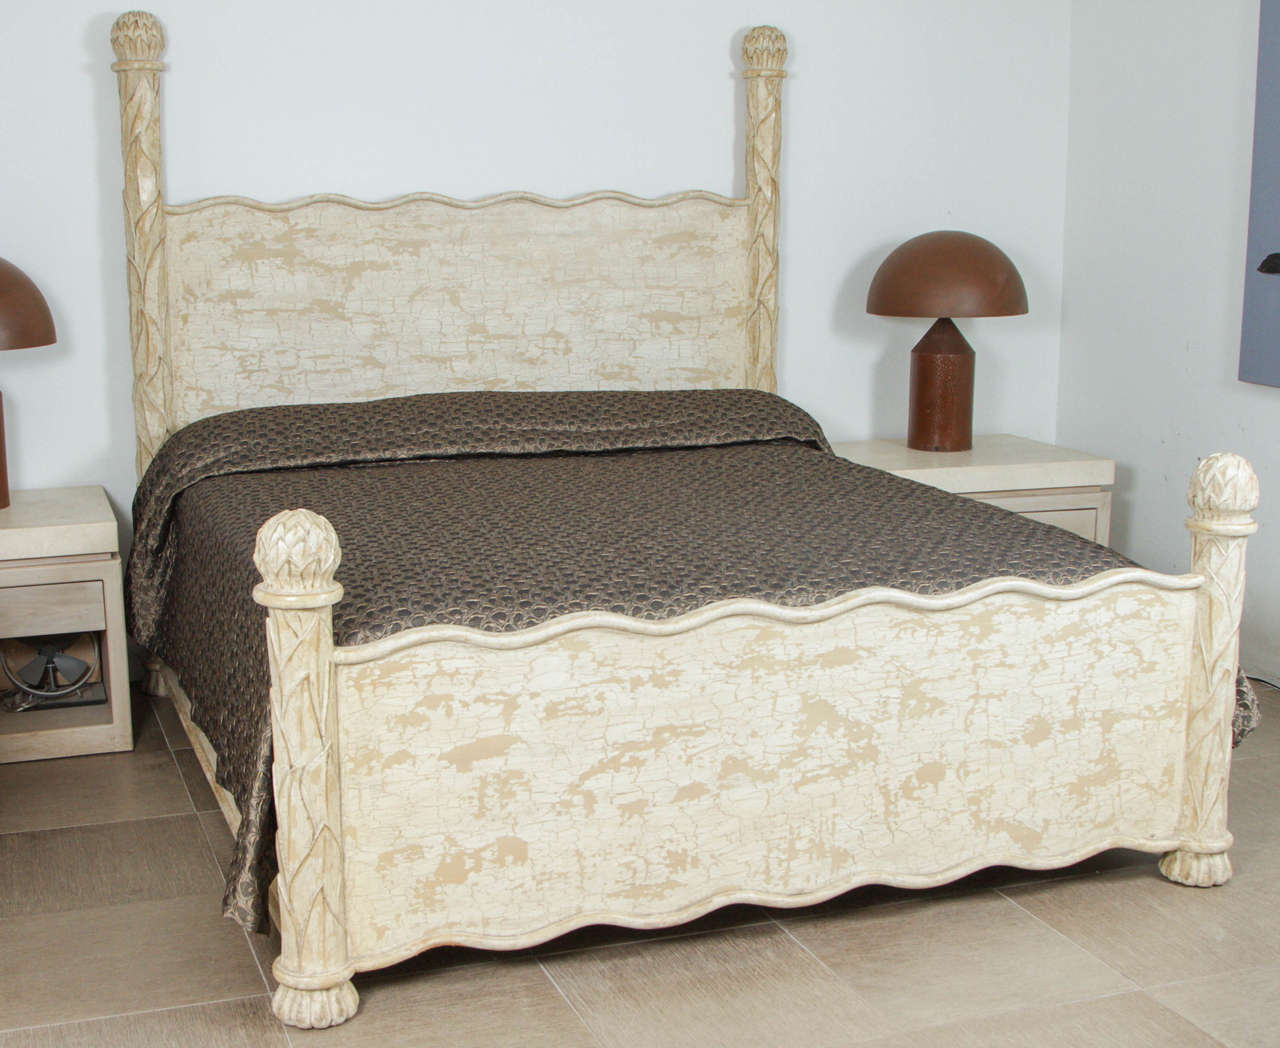 Carved wooden bed frame.
The corner posts are elaborately carved with artichoke finials.
Both headboard and footboard have an undulating molding at the tool and the footboard also has the same motif at the bottom.
The bed has a beige crackled